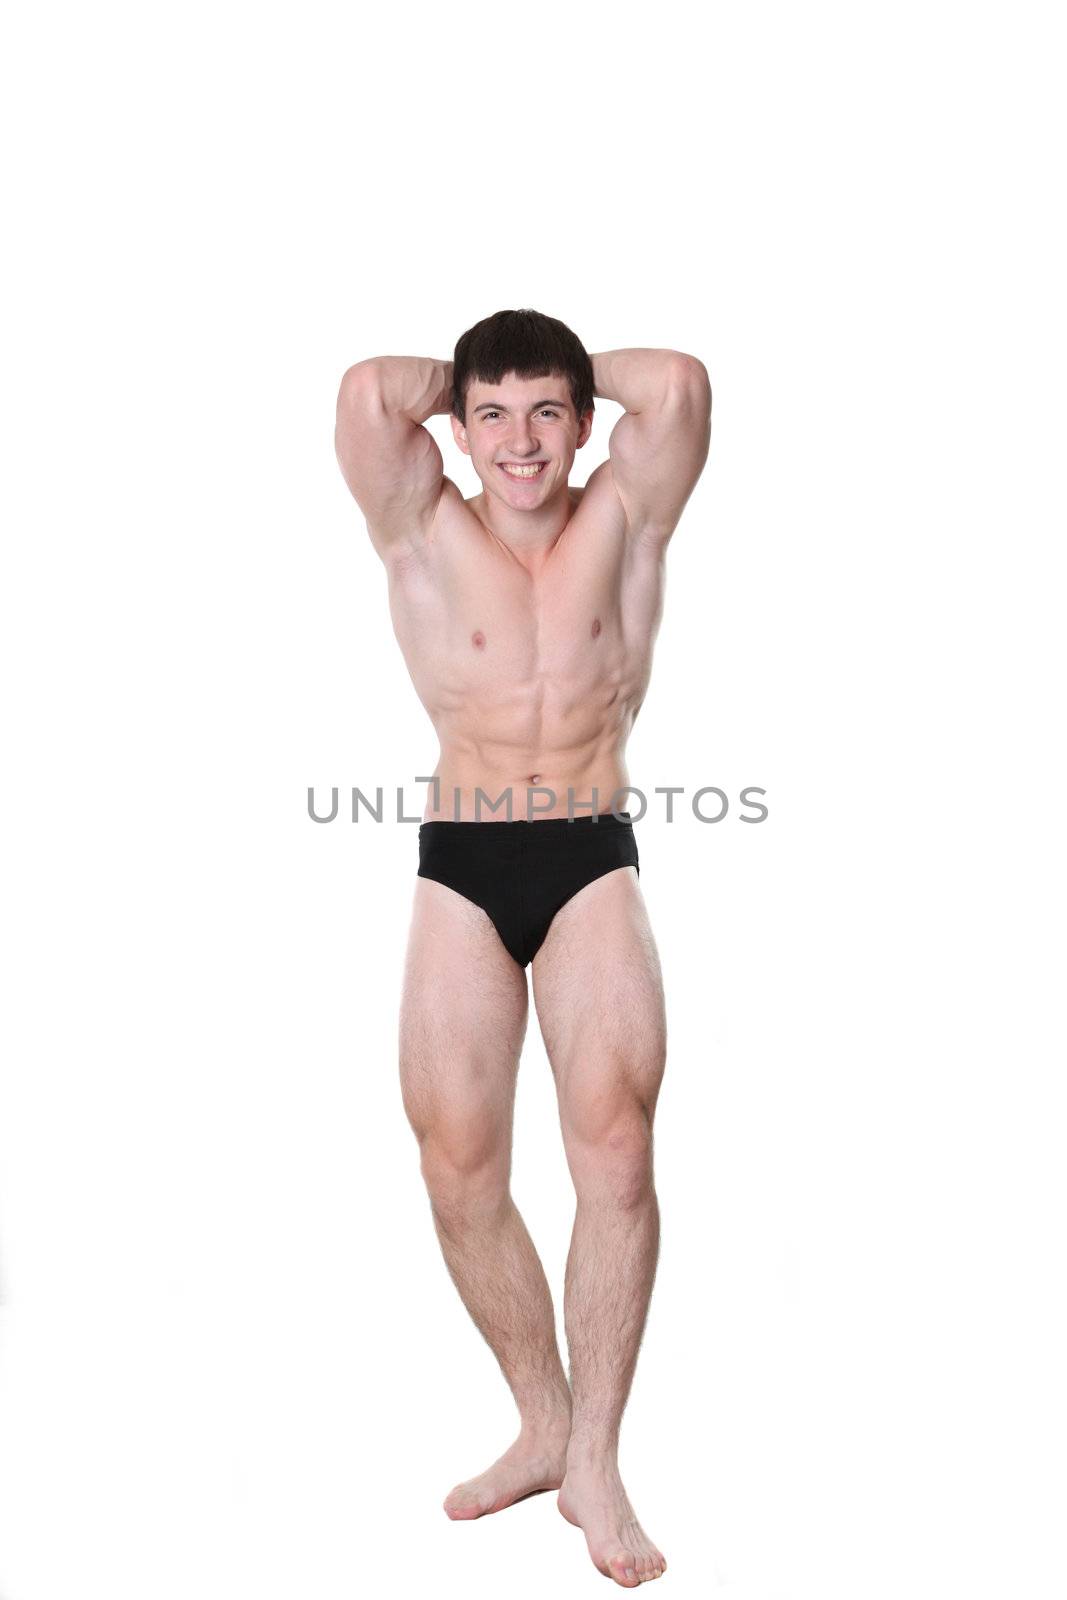 The young athlete the man poses on a white background